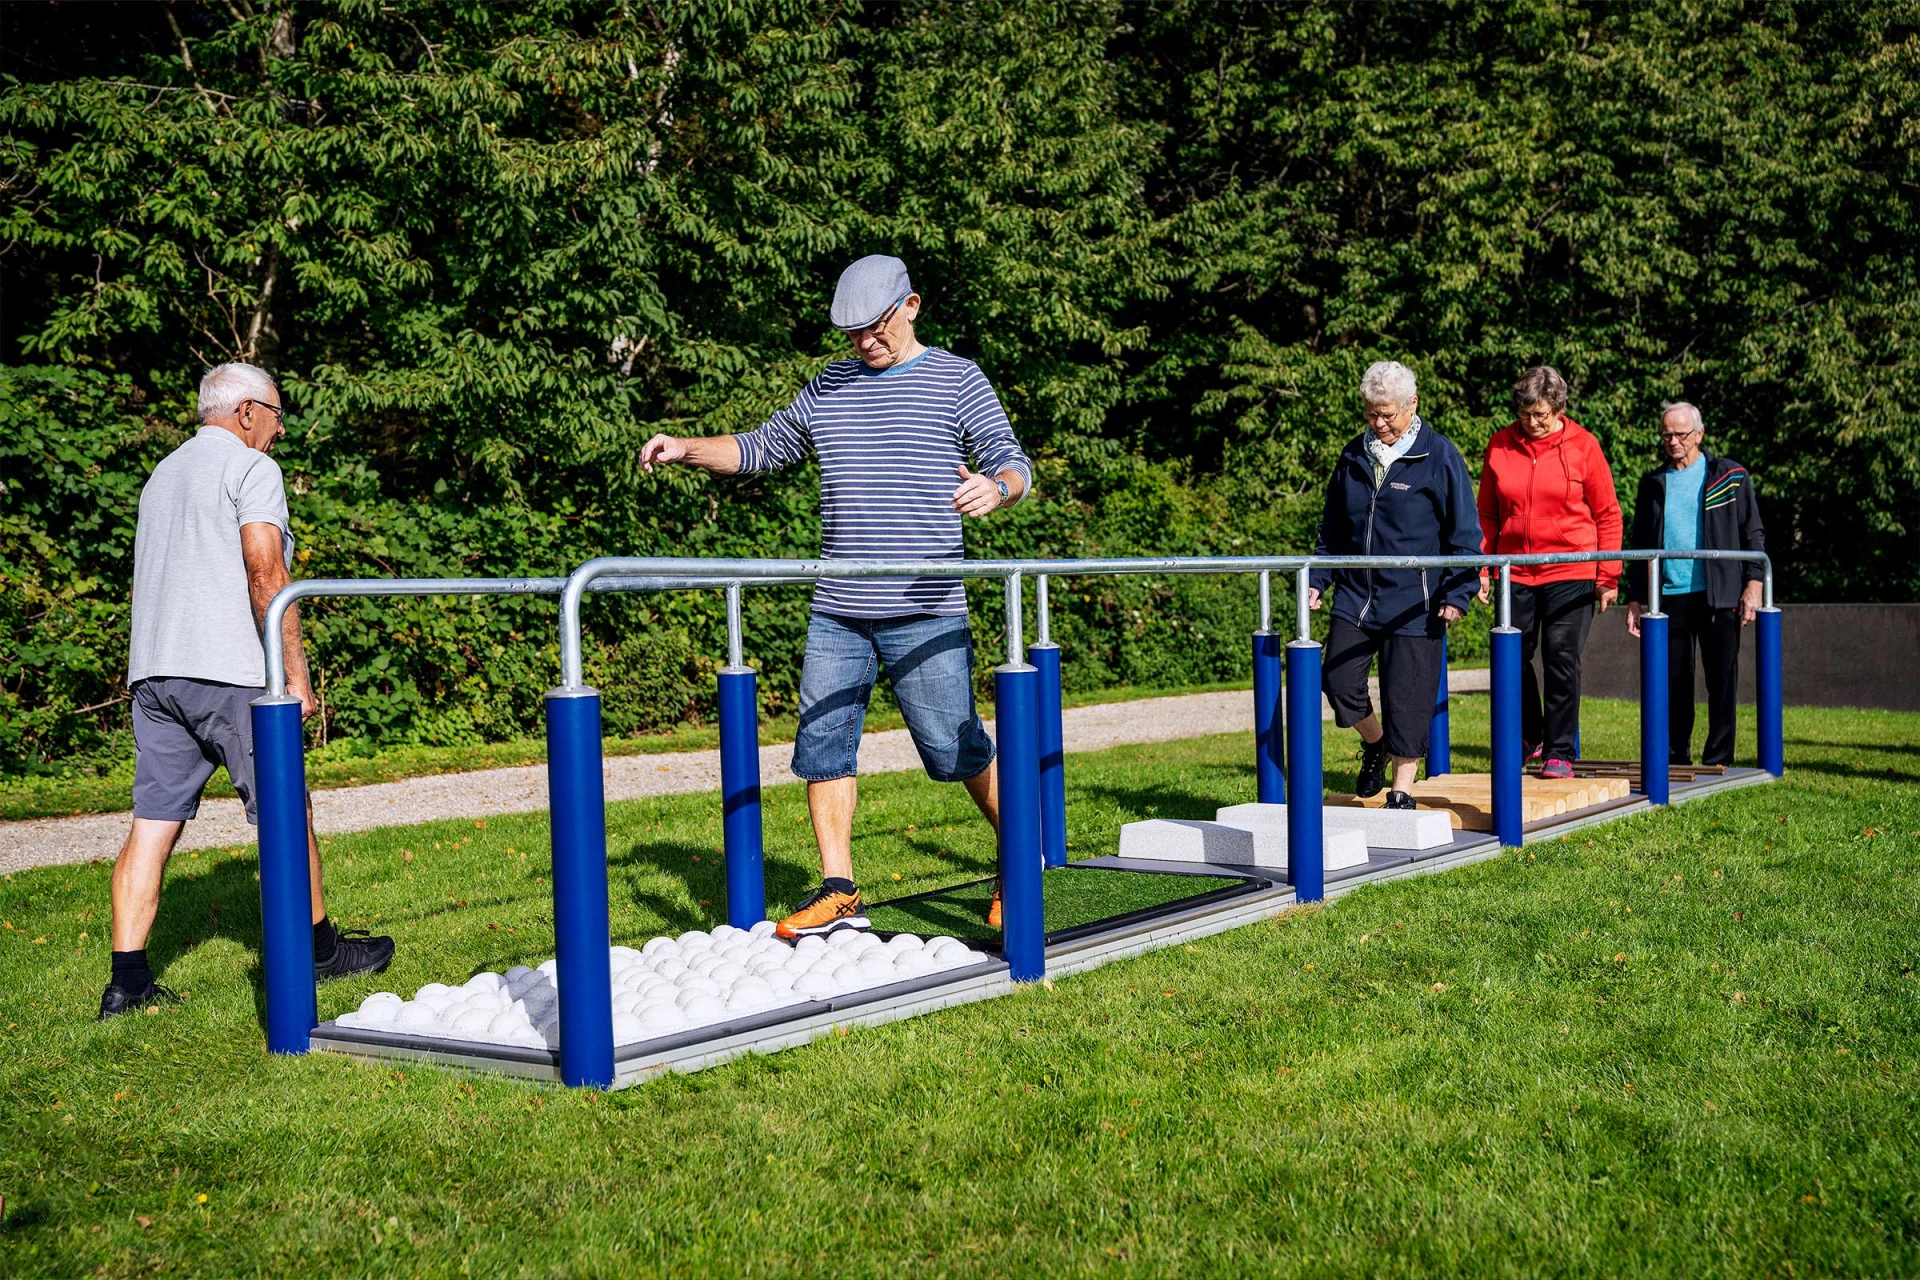 Stay active fitness equipment being used by seniors